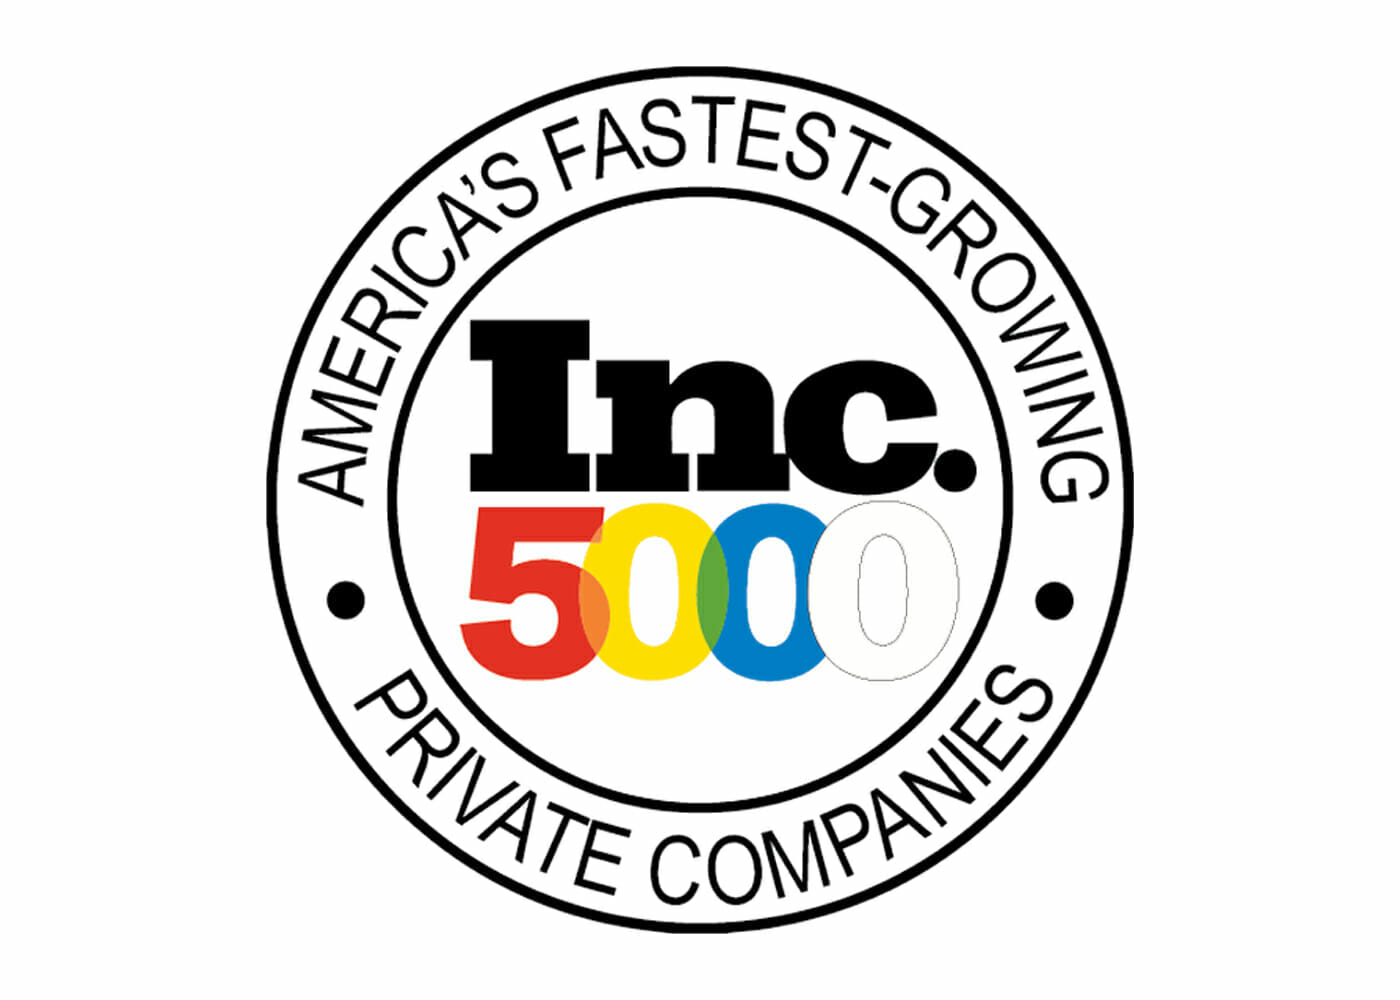 Real Restoration Americas Fastest Growing Private Company copy